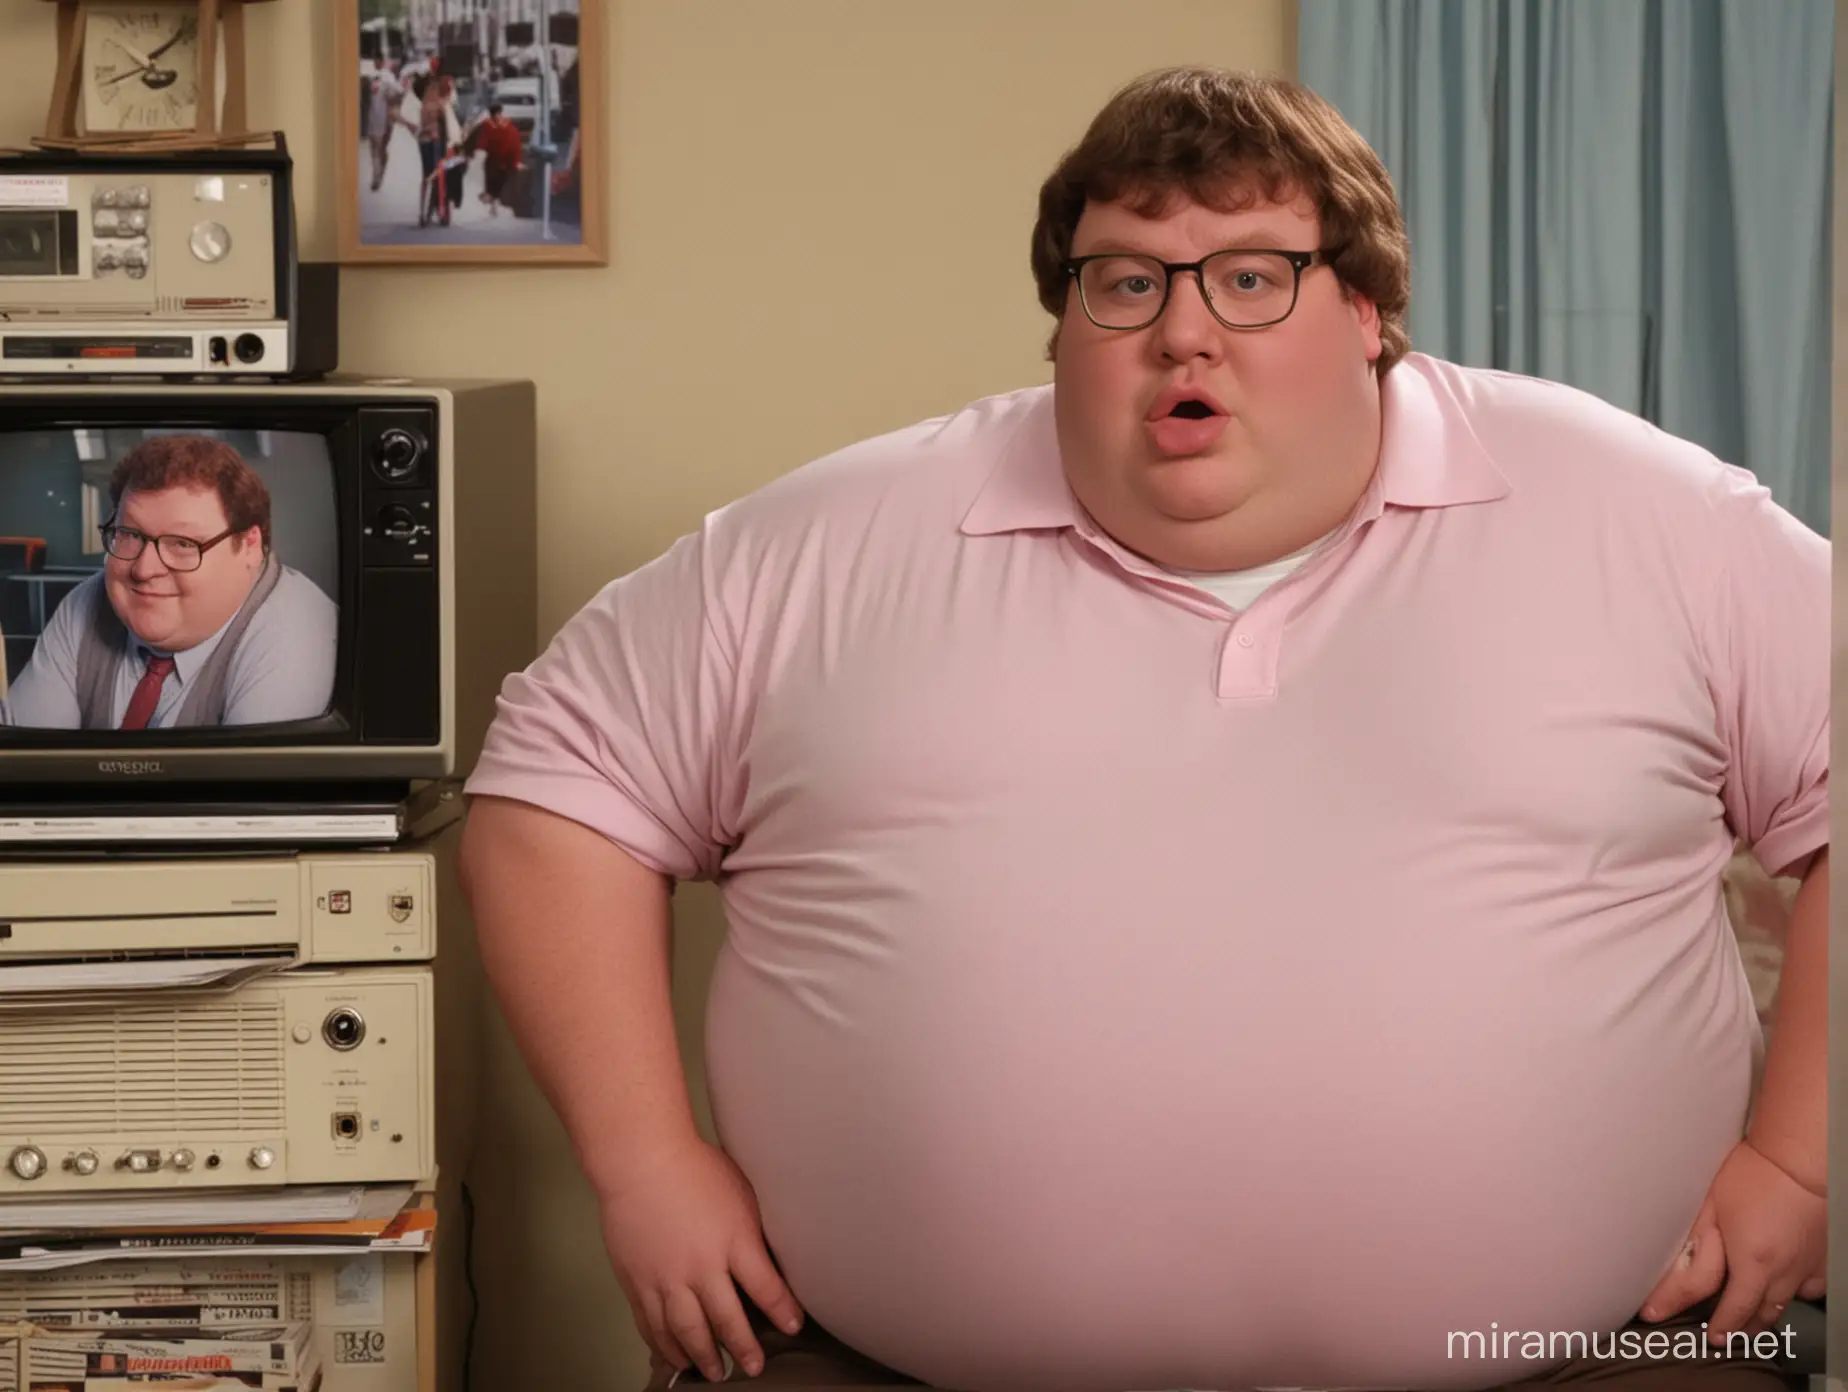 vhs screengrab of a live-action 80’s sitcom featuring an overweight peter griffin